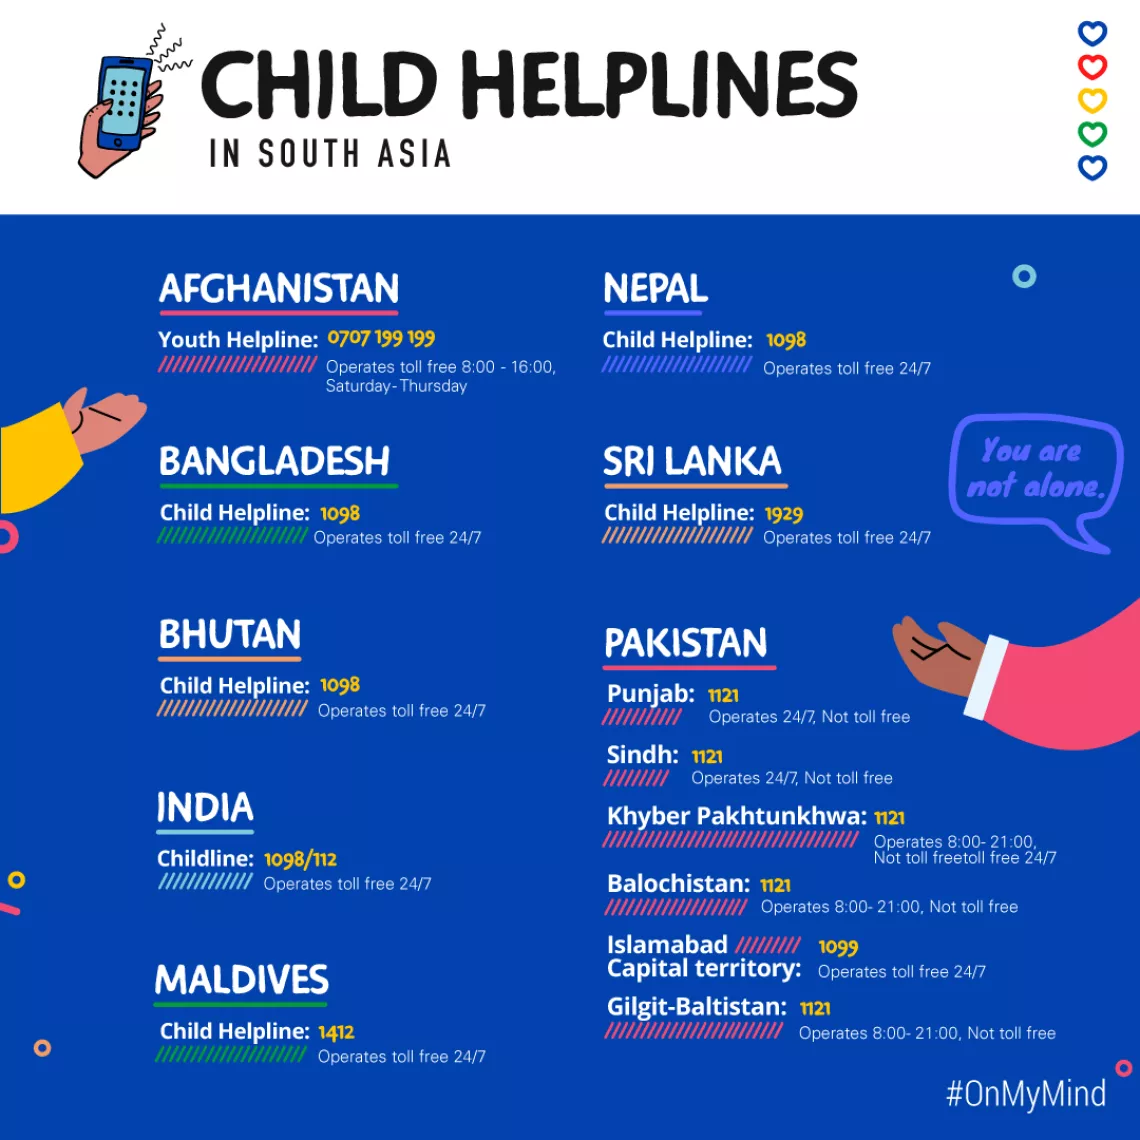 Child Helplines in South Asia